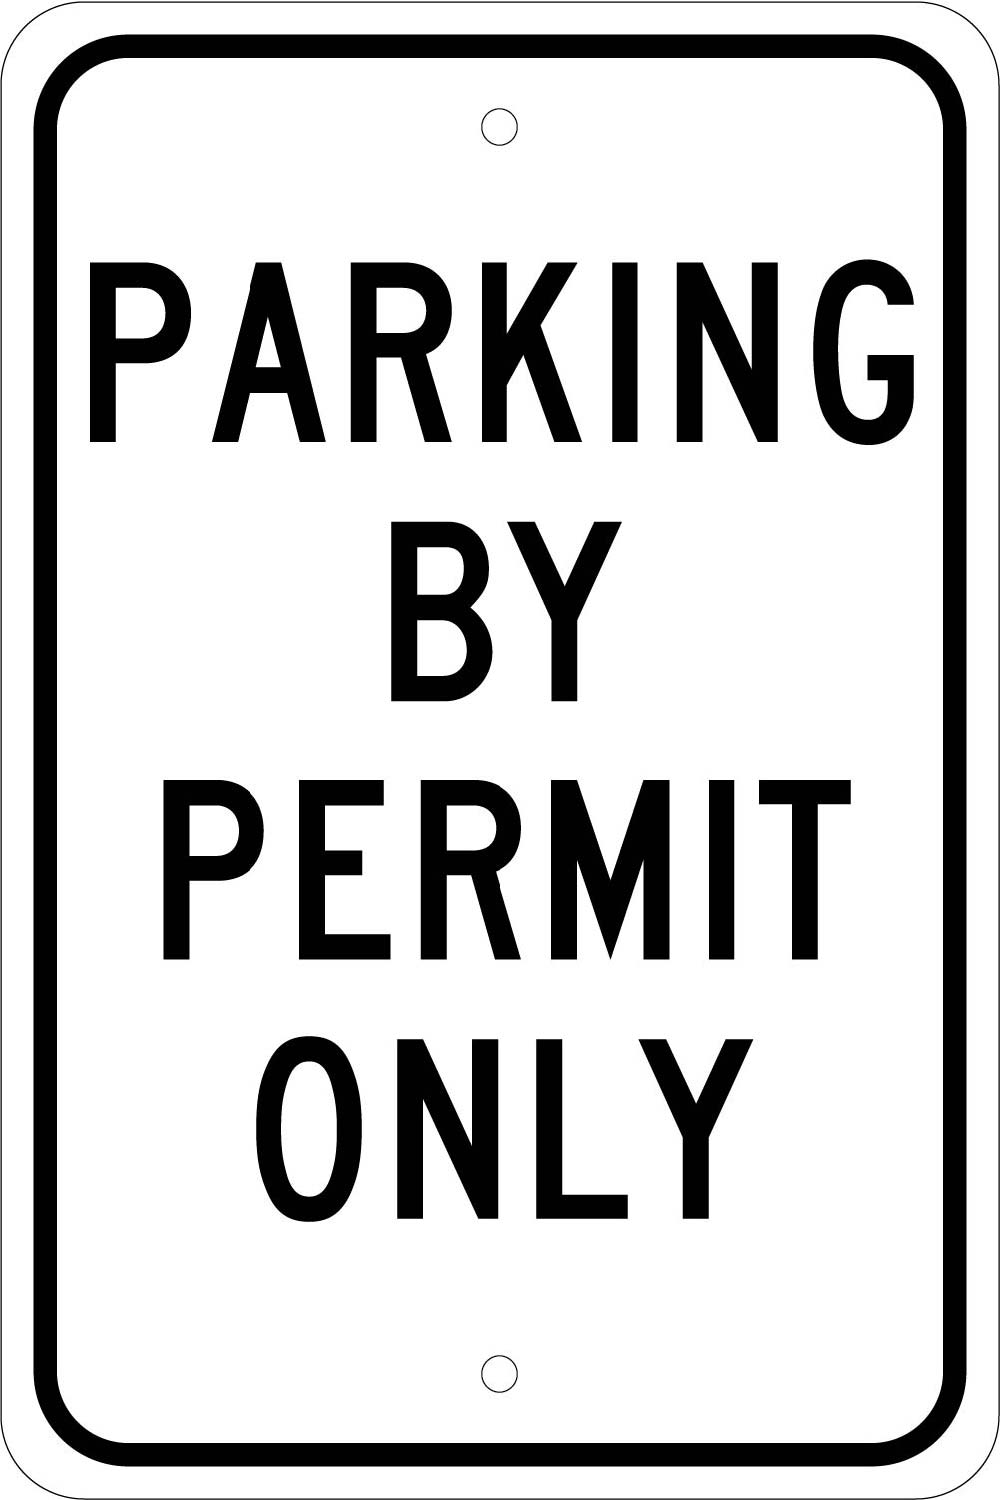 Parking By Permit Only Sign-eSafety Supplies, Inc